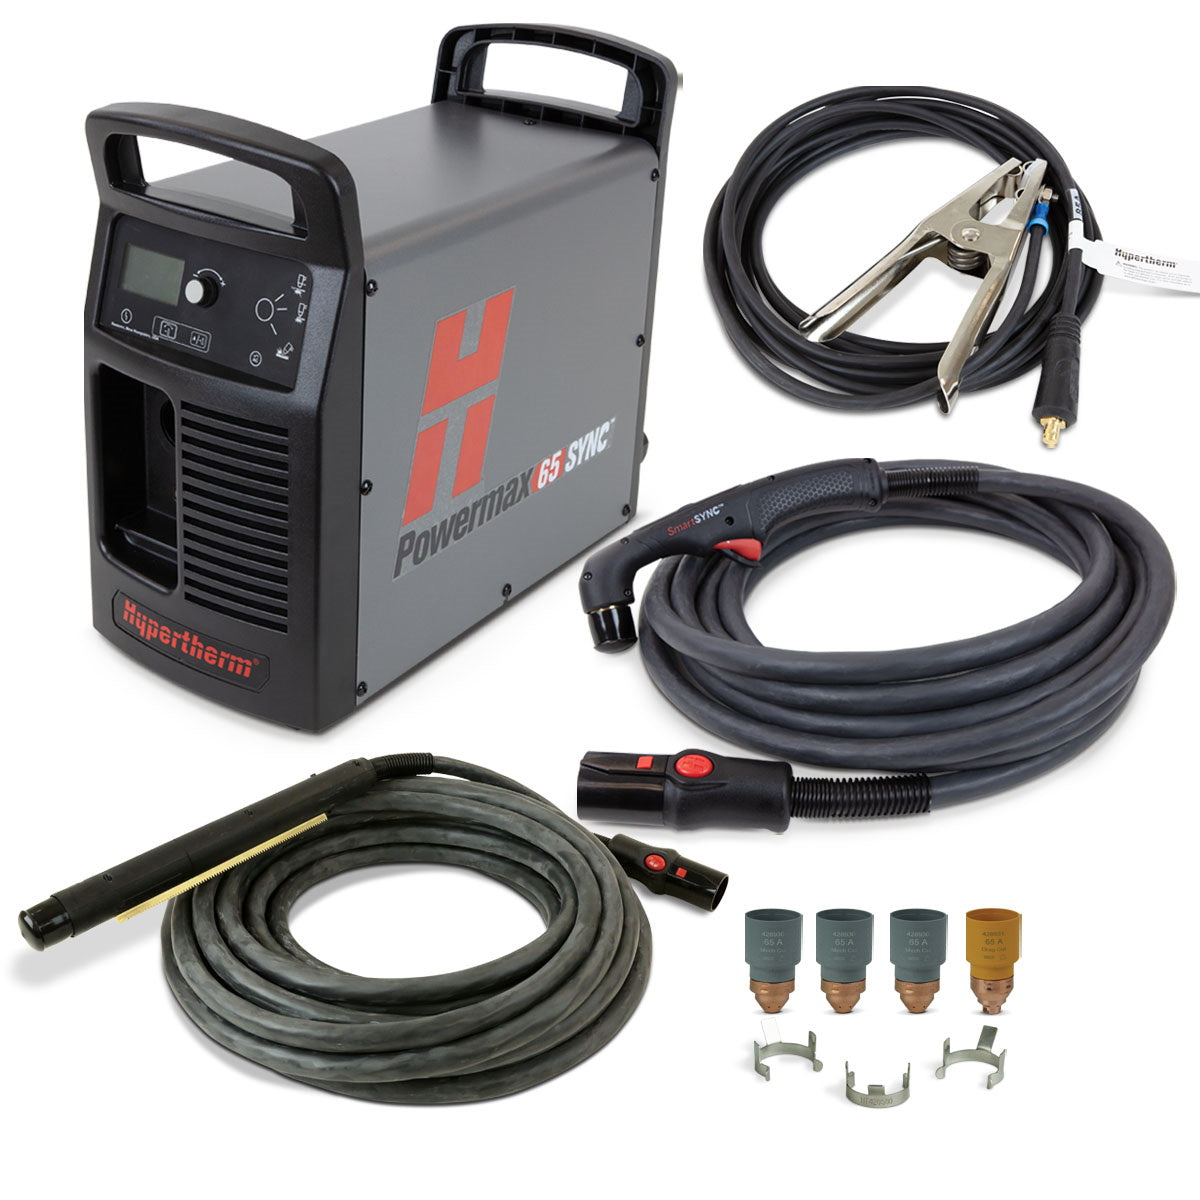 Hypertherm Powermax 65 Sync Plasma w/CPC 25ft 75° Hand and 35ft 180° Mech Torch w/Remote (083351)